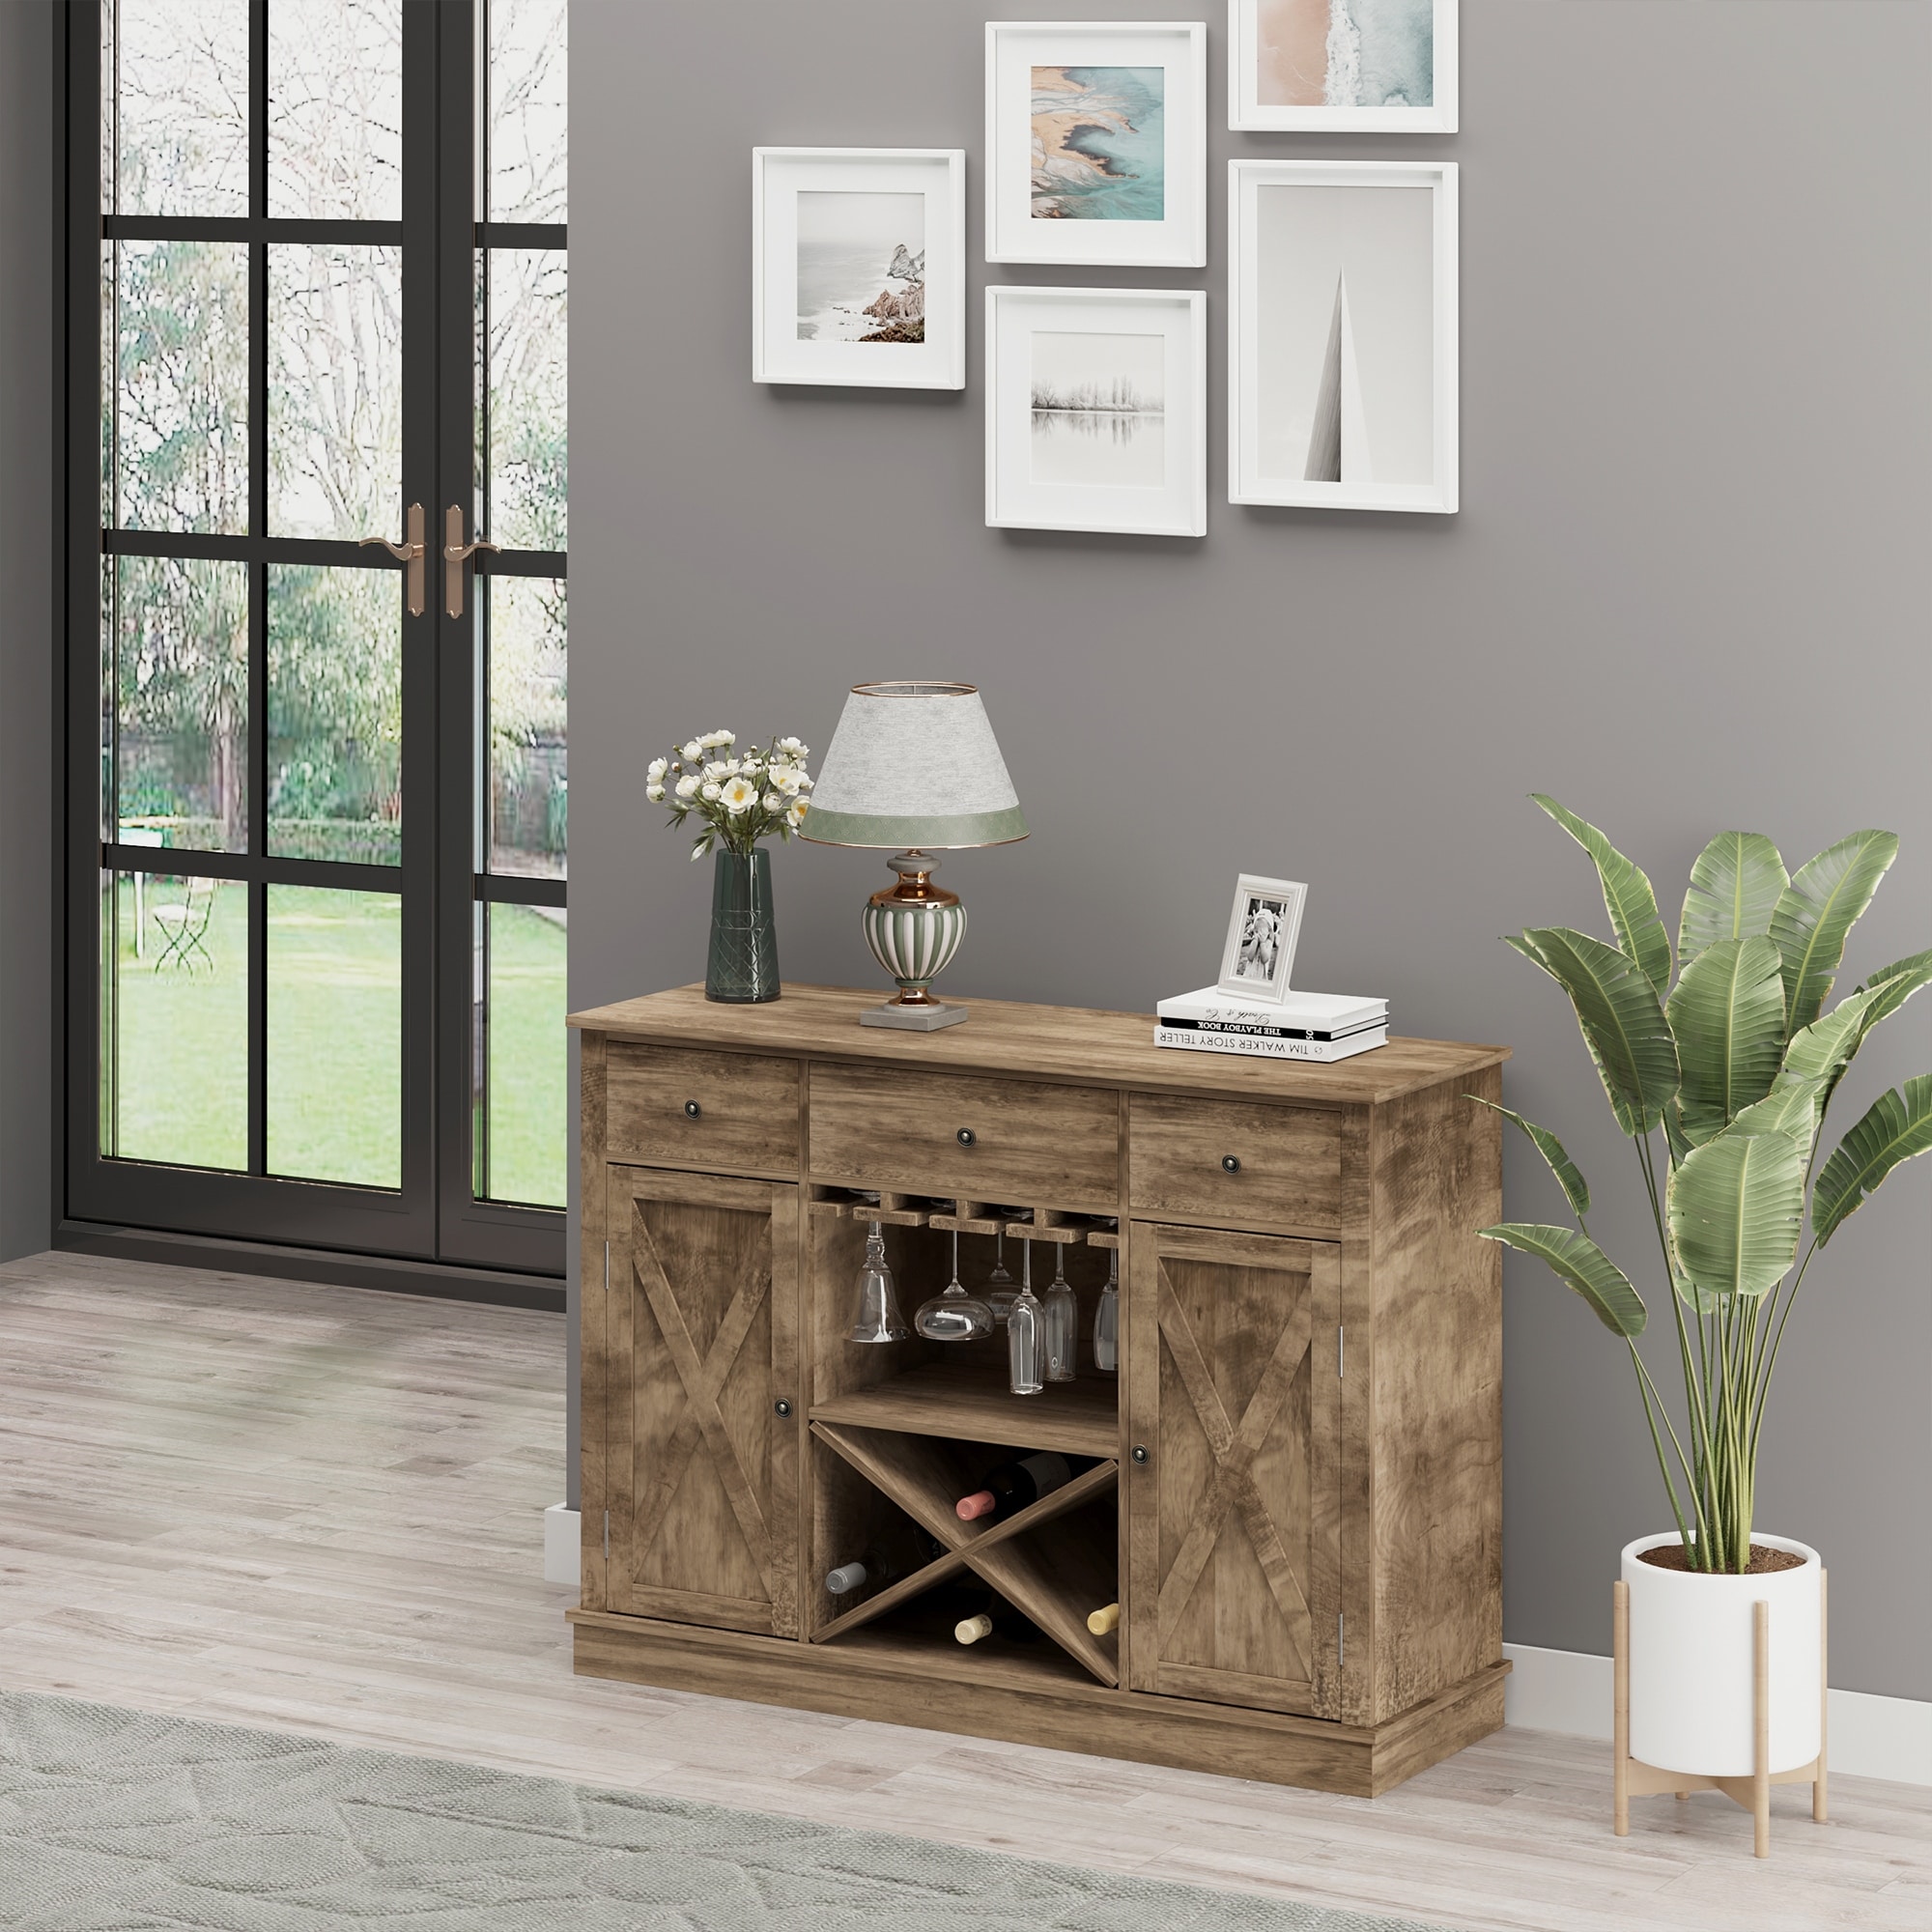 https://ak1.ostkcdn.com/images/products/is/images/direct/12246840adcb316b700da71bdecd8ed2ac51908e/HOMCOM-Farmhouse-Sideboard-Buffet-Table-Storage-Cabinet-with-3-Drawers%2C-X-Shaped-Wine-Rack%2C-Stemware-Holder%2C-%26-Cabinets.jpg